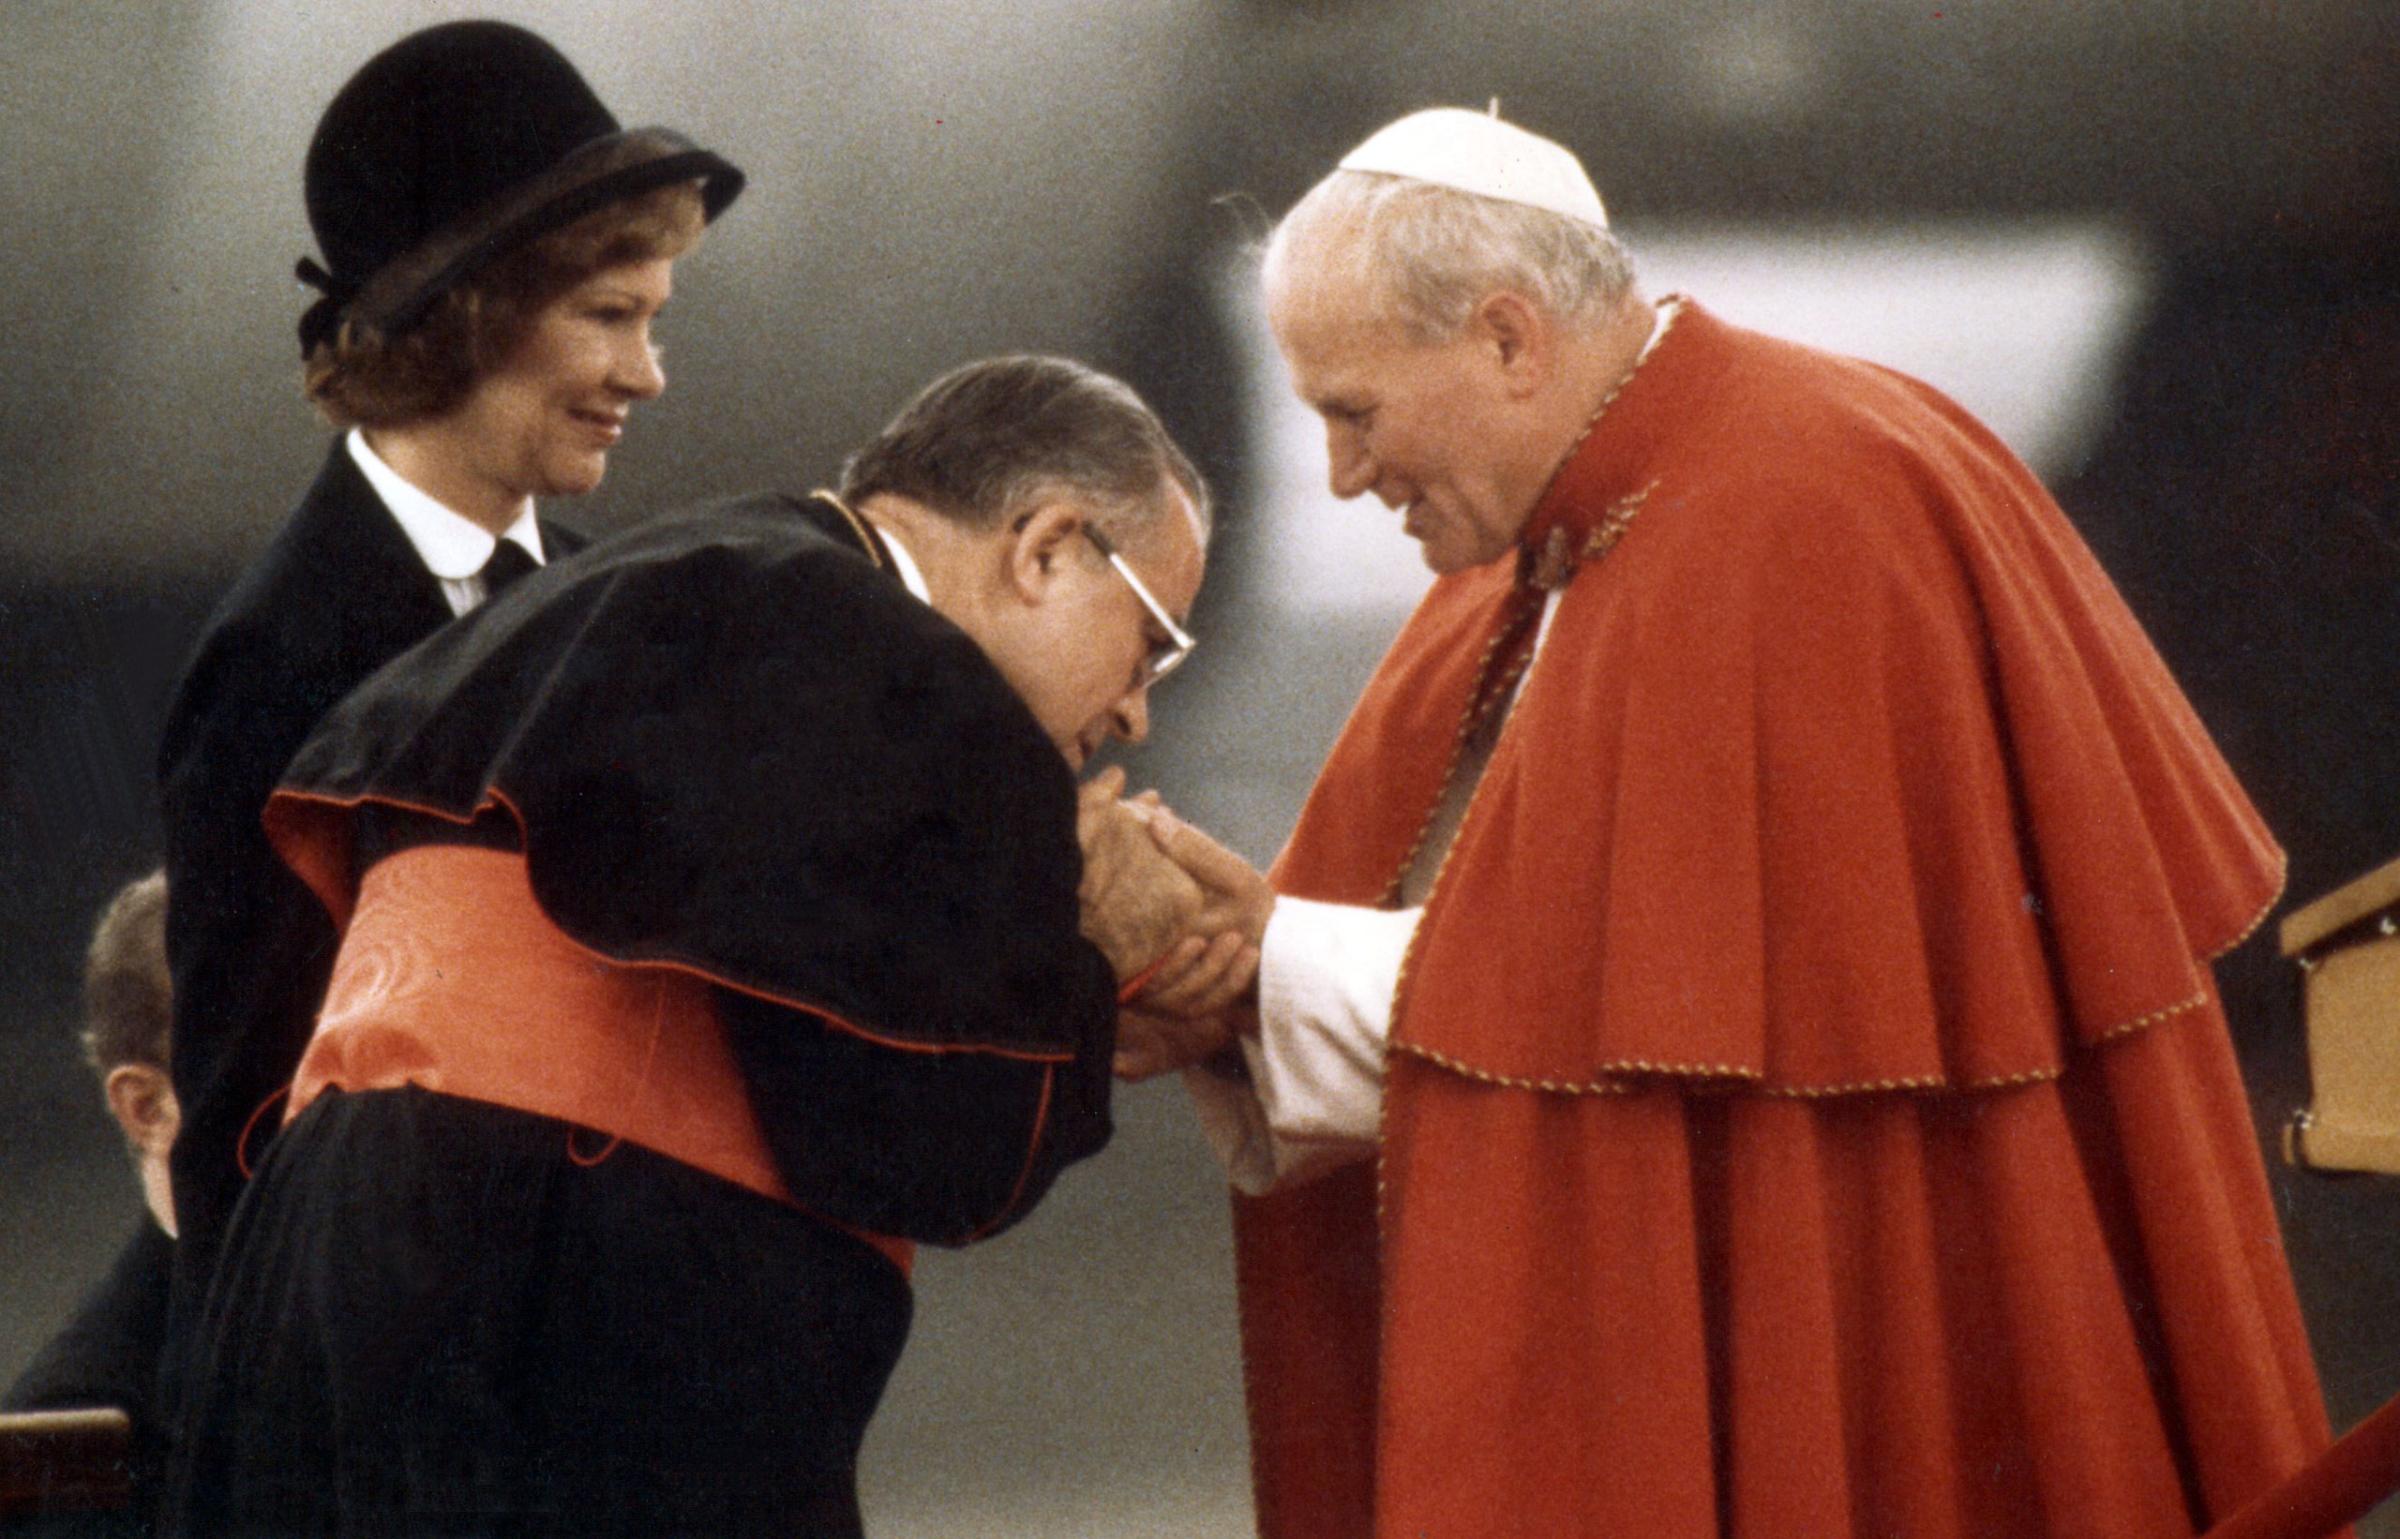 Cardinal Humberto S. Mederios and first lady Rosalyn Carter greeted Pope John Paul II on his arrival at Logan Airport. Boston, October 1, 1979.